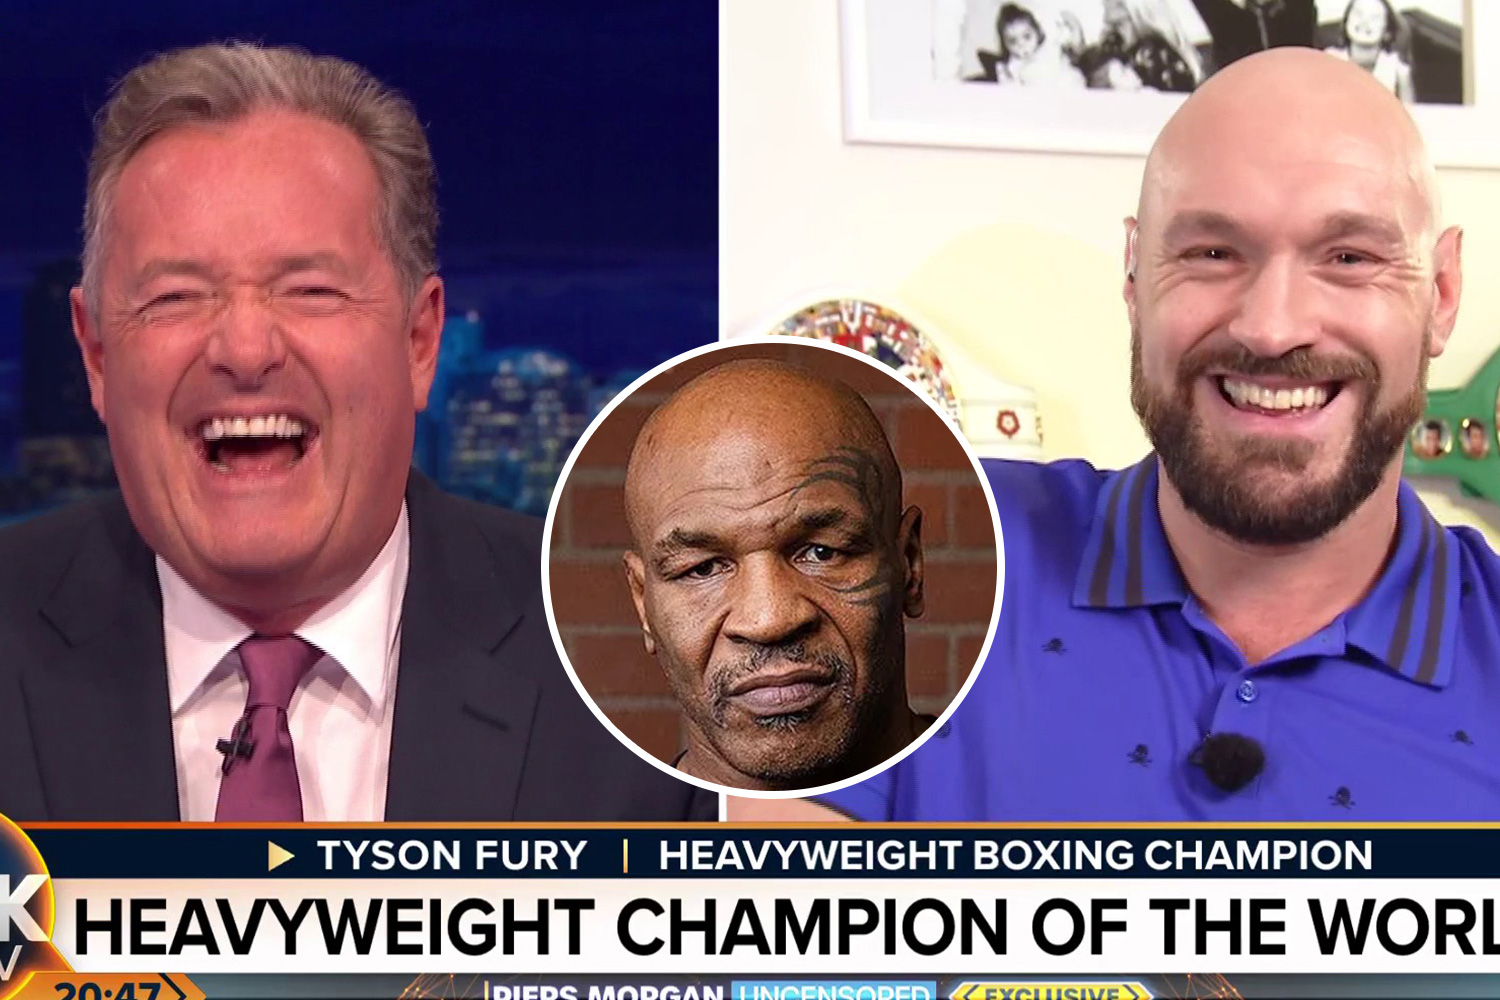 Fury would PAY to get punched by Tyson as he backs legend over plane brawl